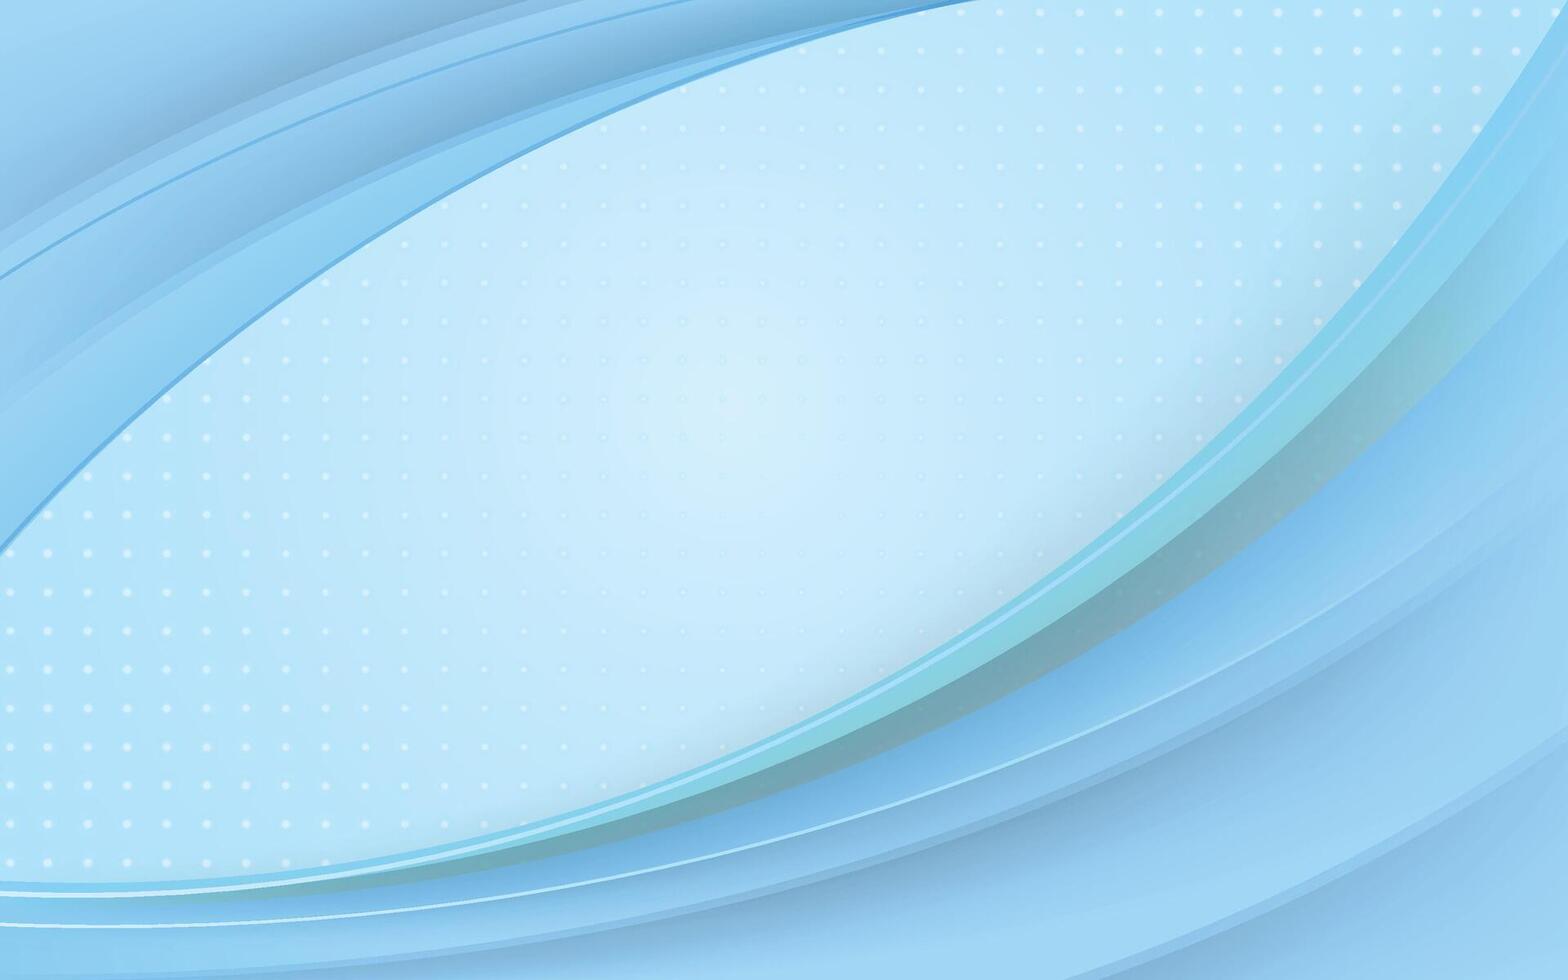 Abstract blue background with curved lines vector